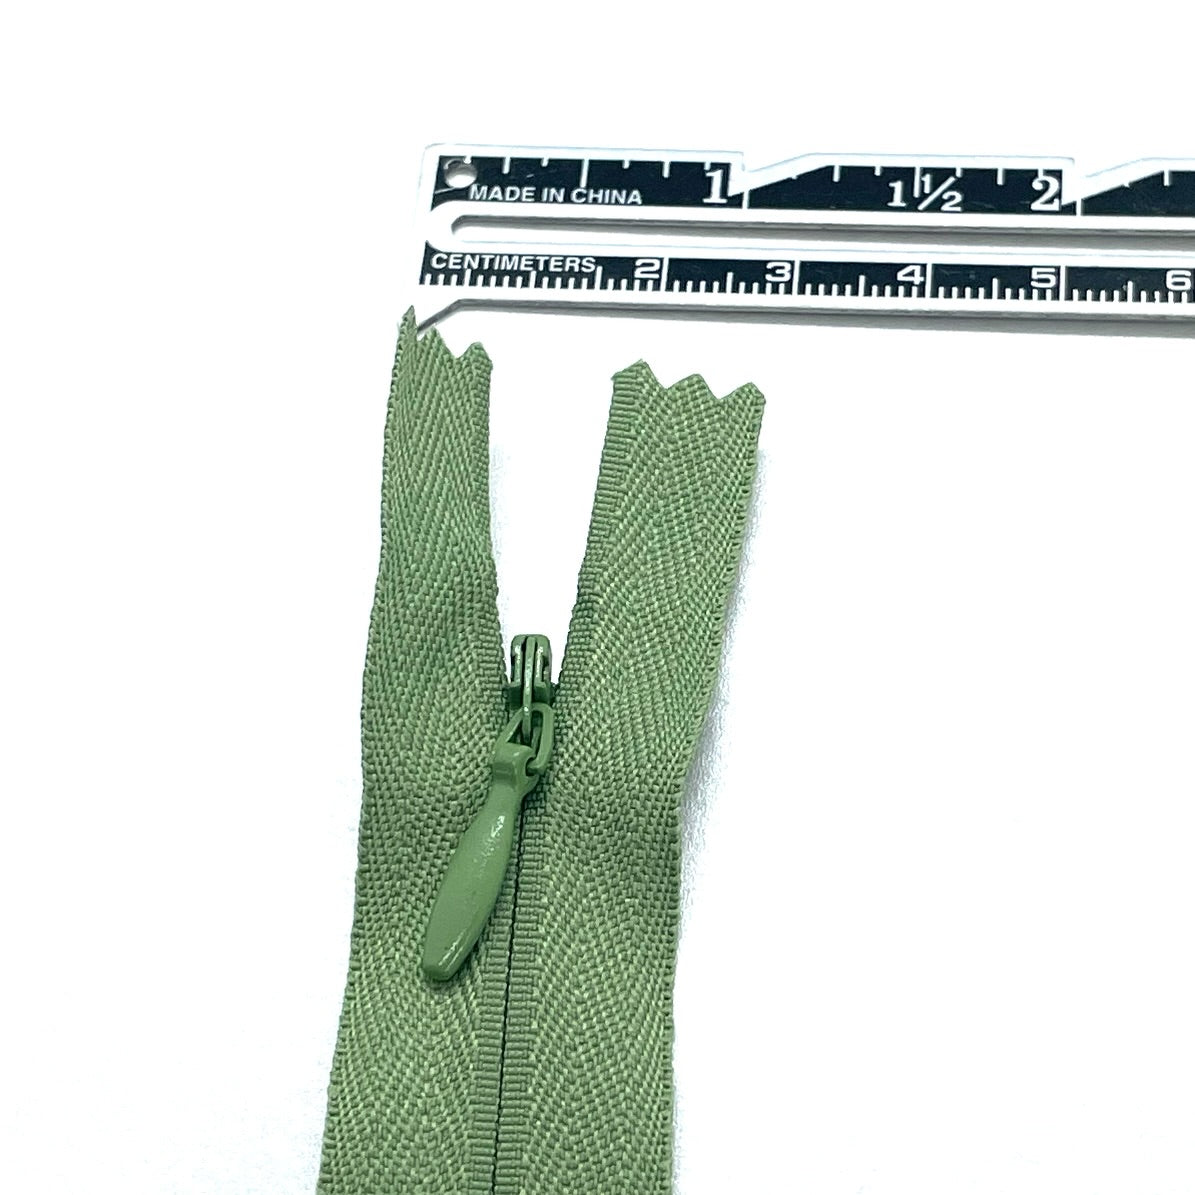 Photo of dusky sage green invisible or concealed zips available in many different colours and sizes. Great for achieving a professional finish in your products. Invisible zippers are perfect for dressmaking, cushions, crafts, etc., where you don't want your zipper showing. Installing them can be tricky without the right foot on your machine; a normal zipper foot is for installing standard zippers, while you will need an invisible zipper foot for a professional result